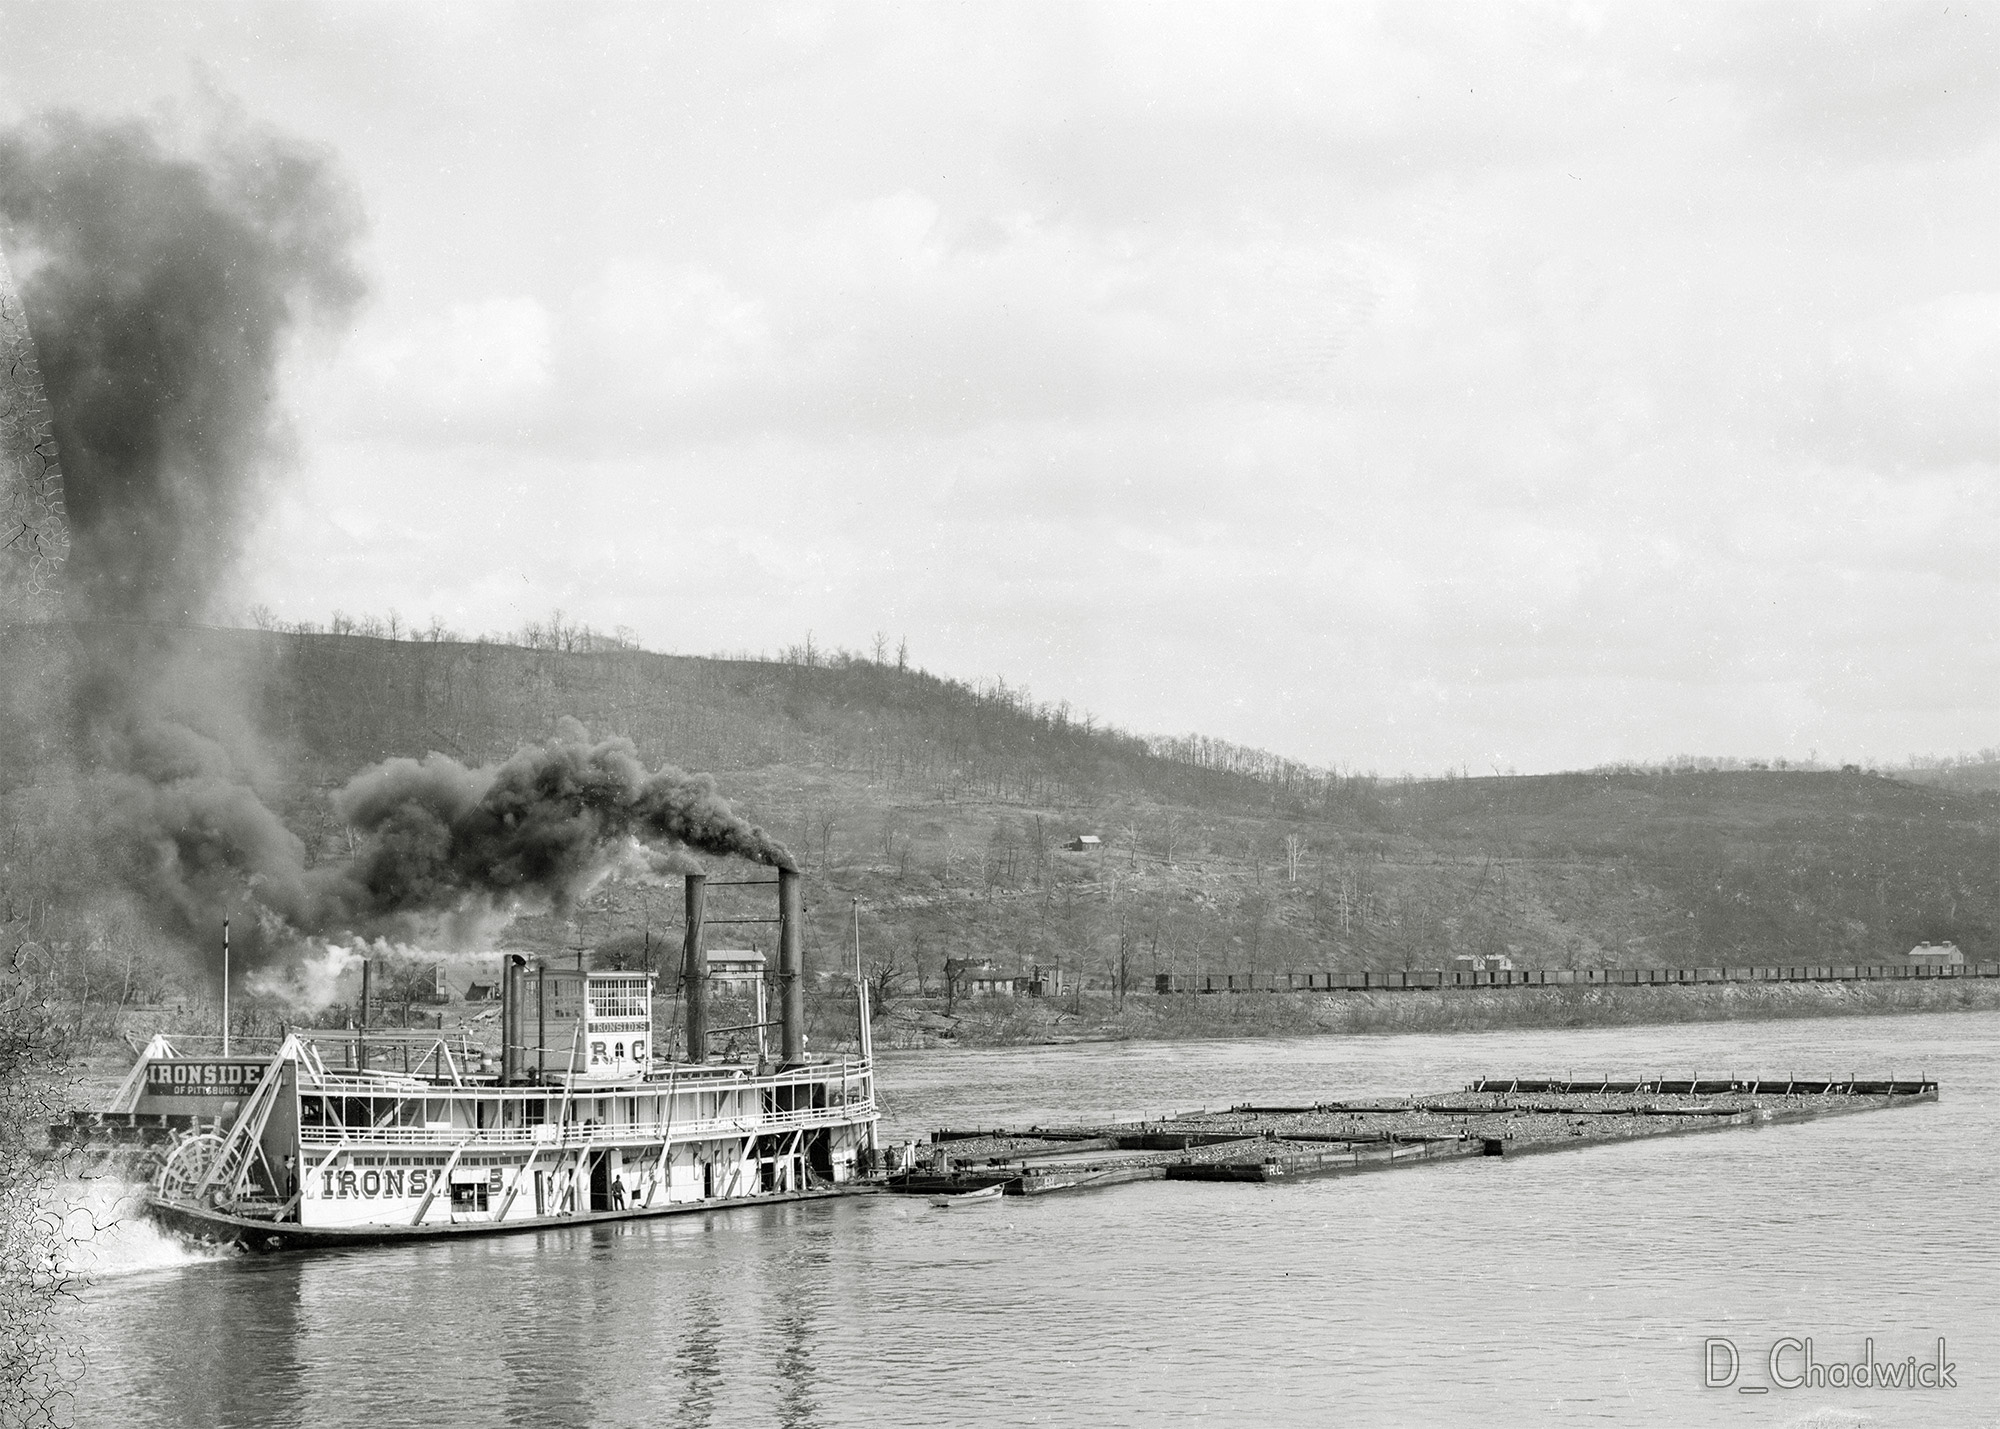 The Pittsburgh Sternwheel Tow Boat "Ironsides" was built in Pittsburgh, Pennsylvania in 1869 and was in service until she sank at Point Pleasant, West Virginia on August 6, 1927. Since there's no "h" in the spelling of Pittsburgh on the stern that dates the picture to between 1890 and 1911. More information can be found here. Scanned from the original 5x7 inch glass negative. View full size.